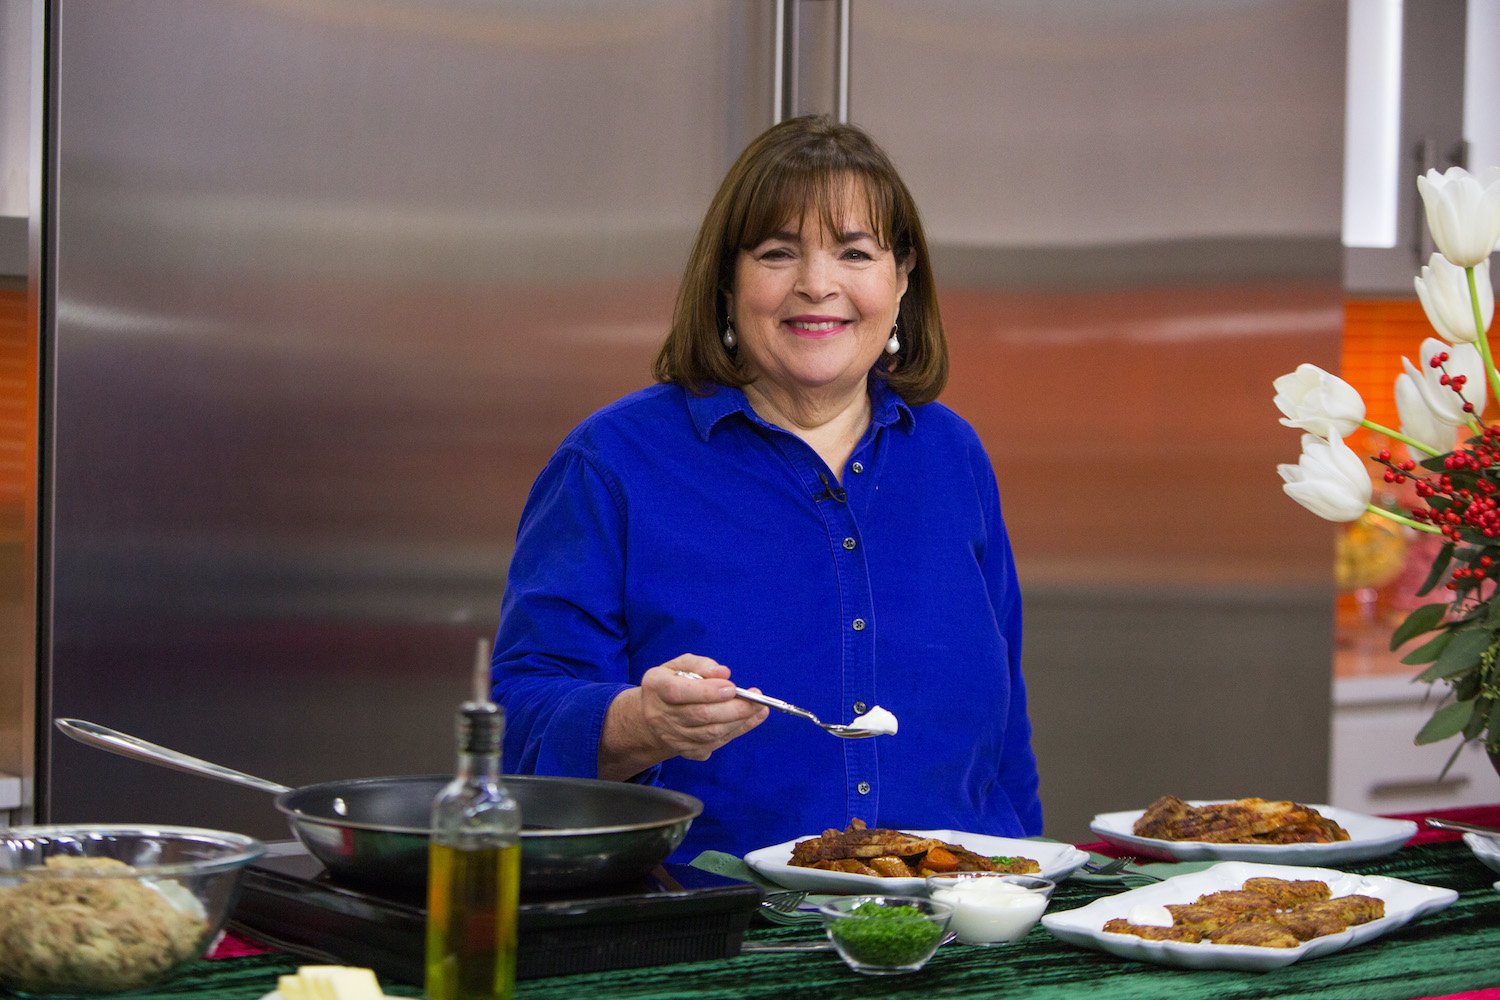 'Barefoot Contessa' Ina Garten on the 'Today' show in 2017